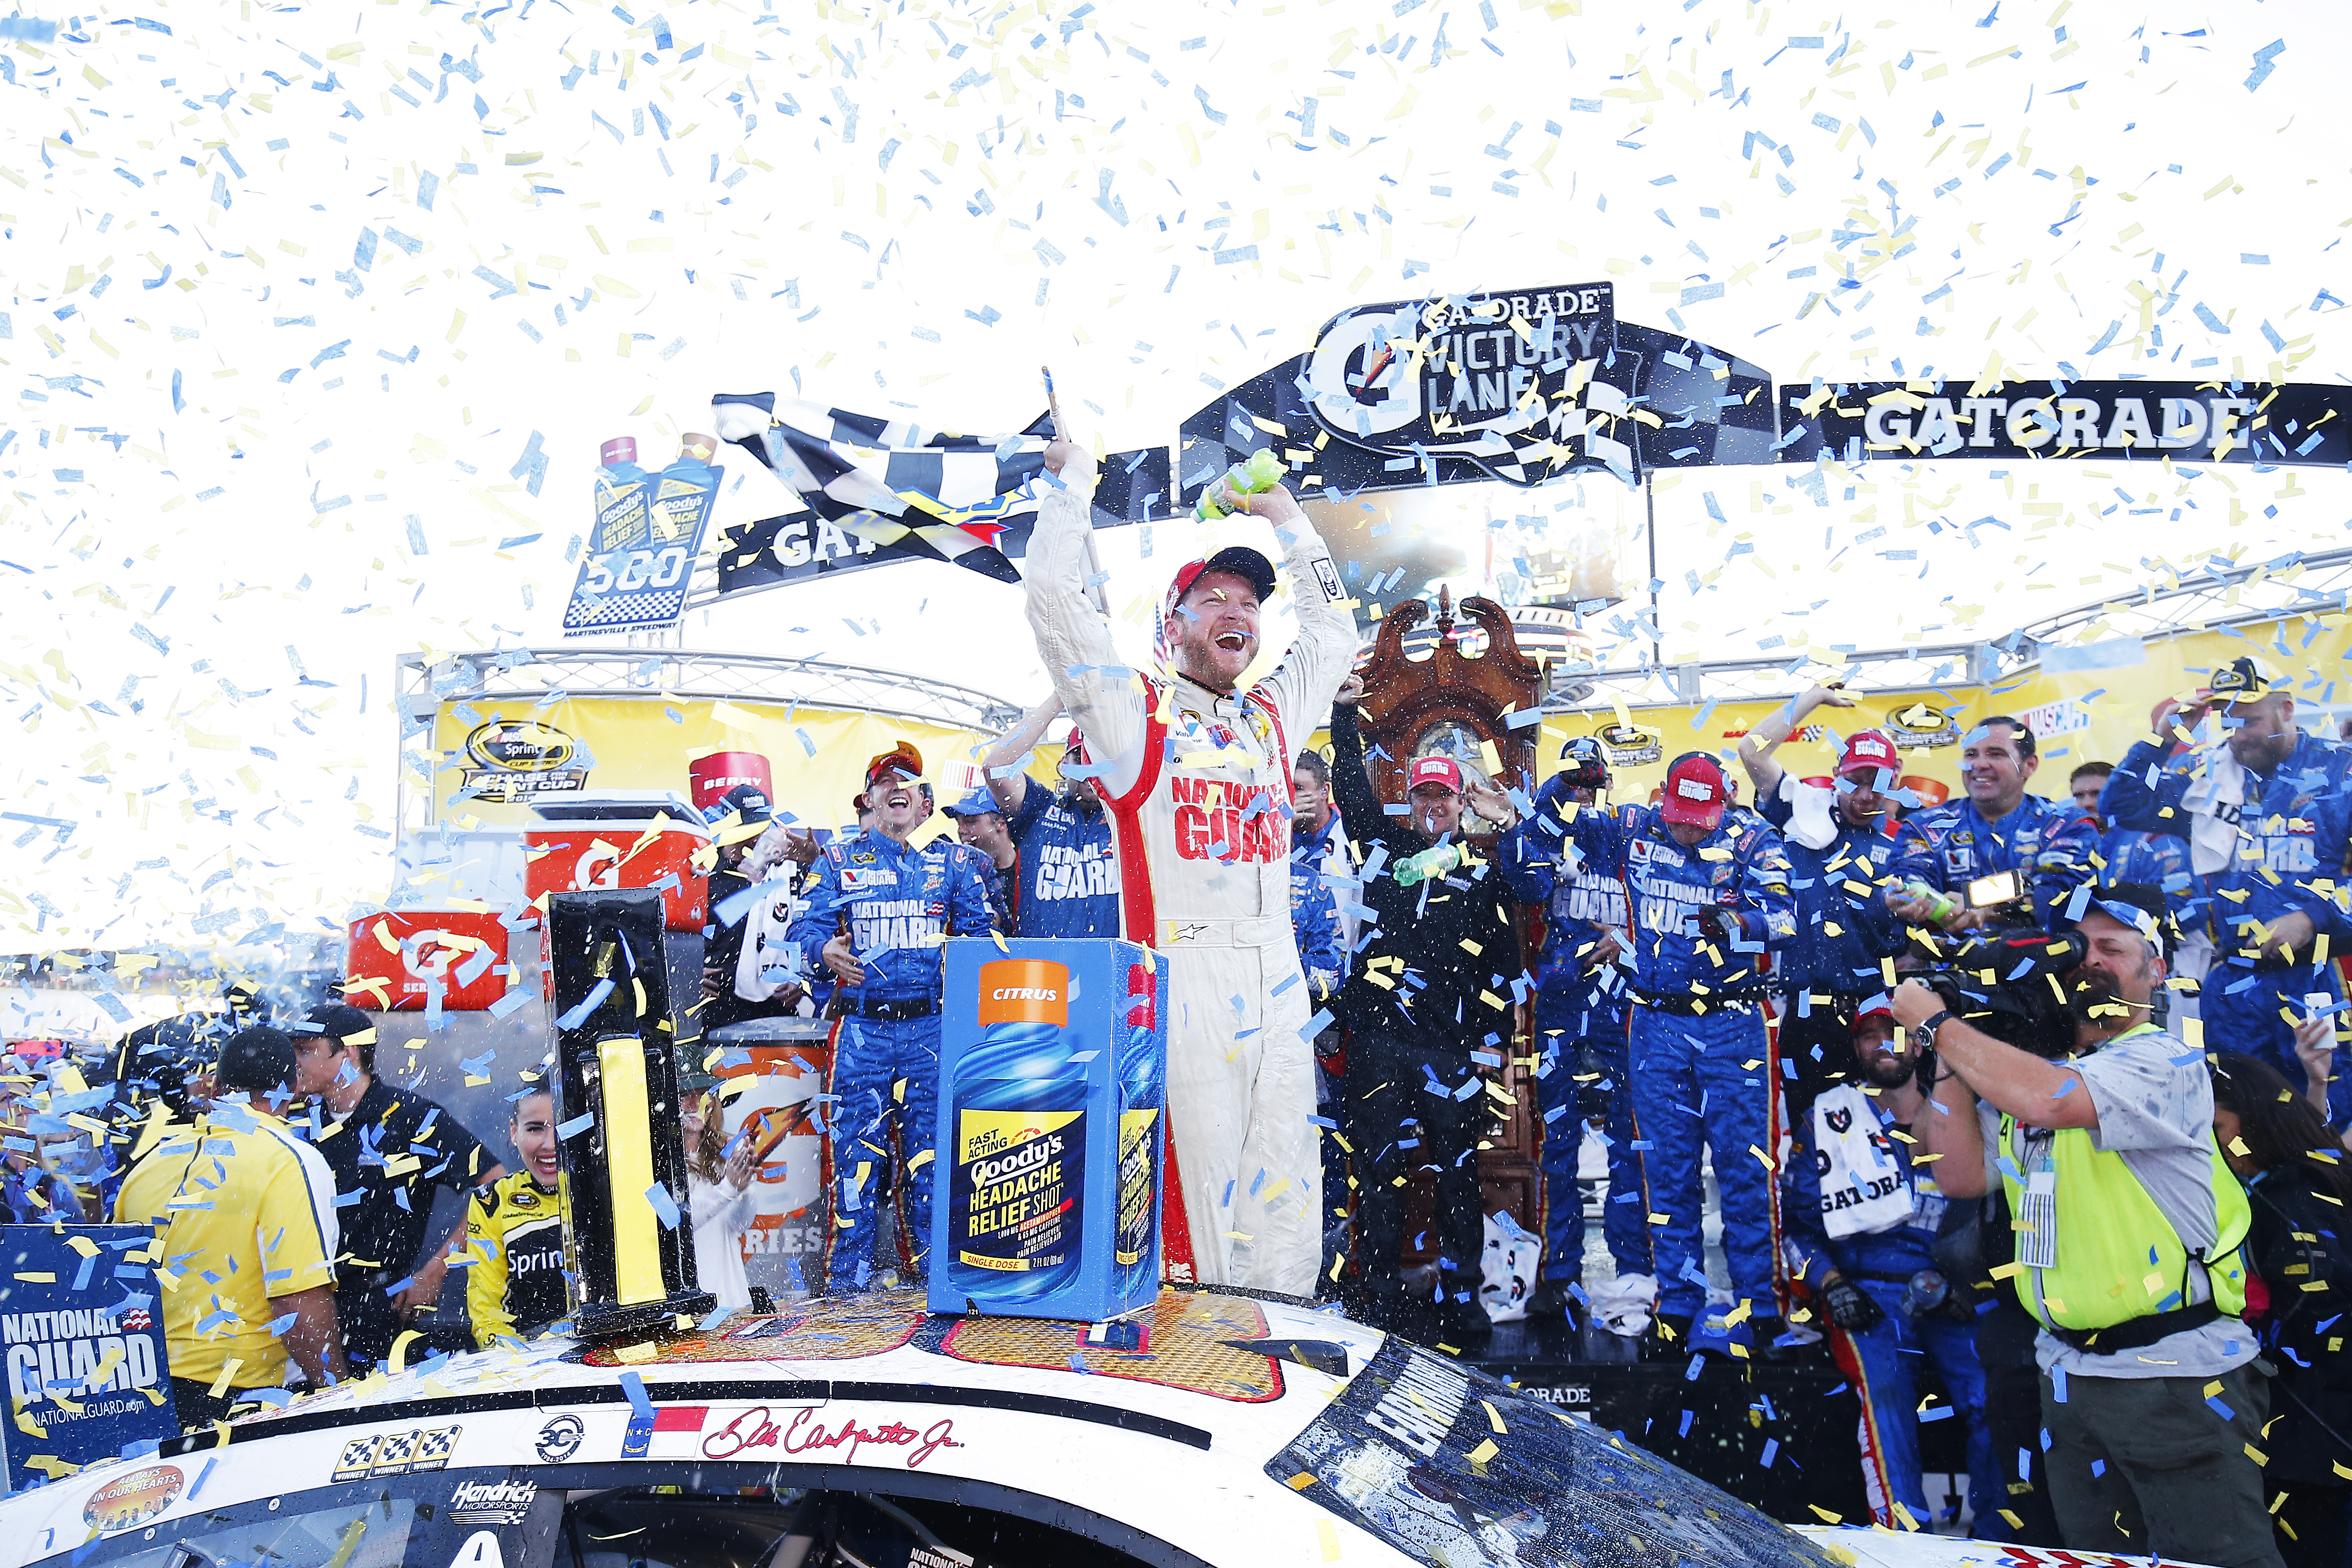 What Chase?  Sure, there is no championship this year for Dale Earnhardt Jr, but he still knows how to win.